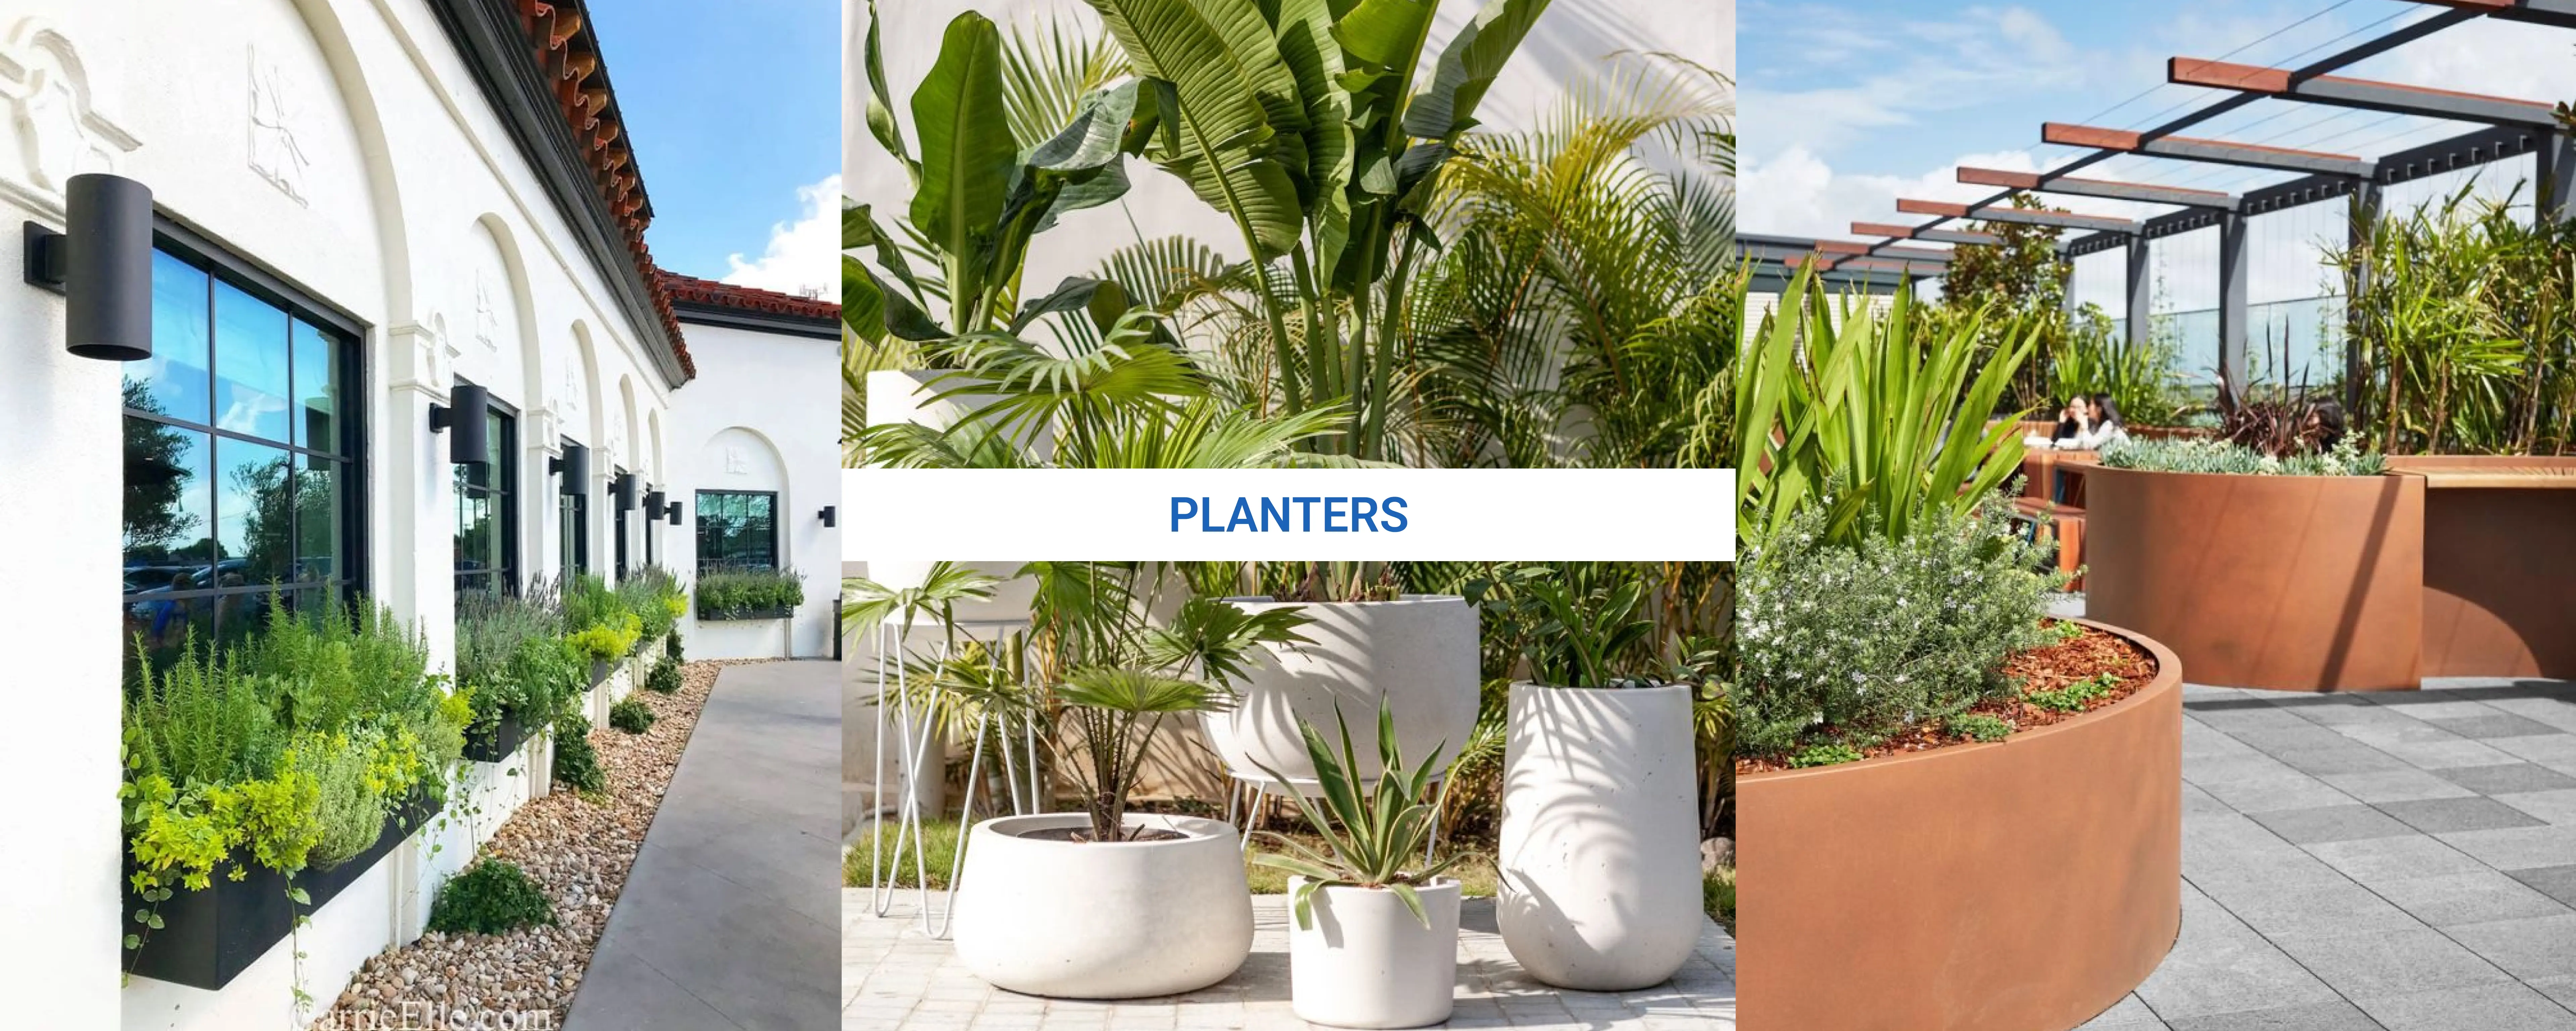 Planters Banner